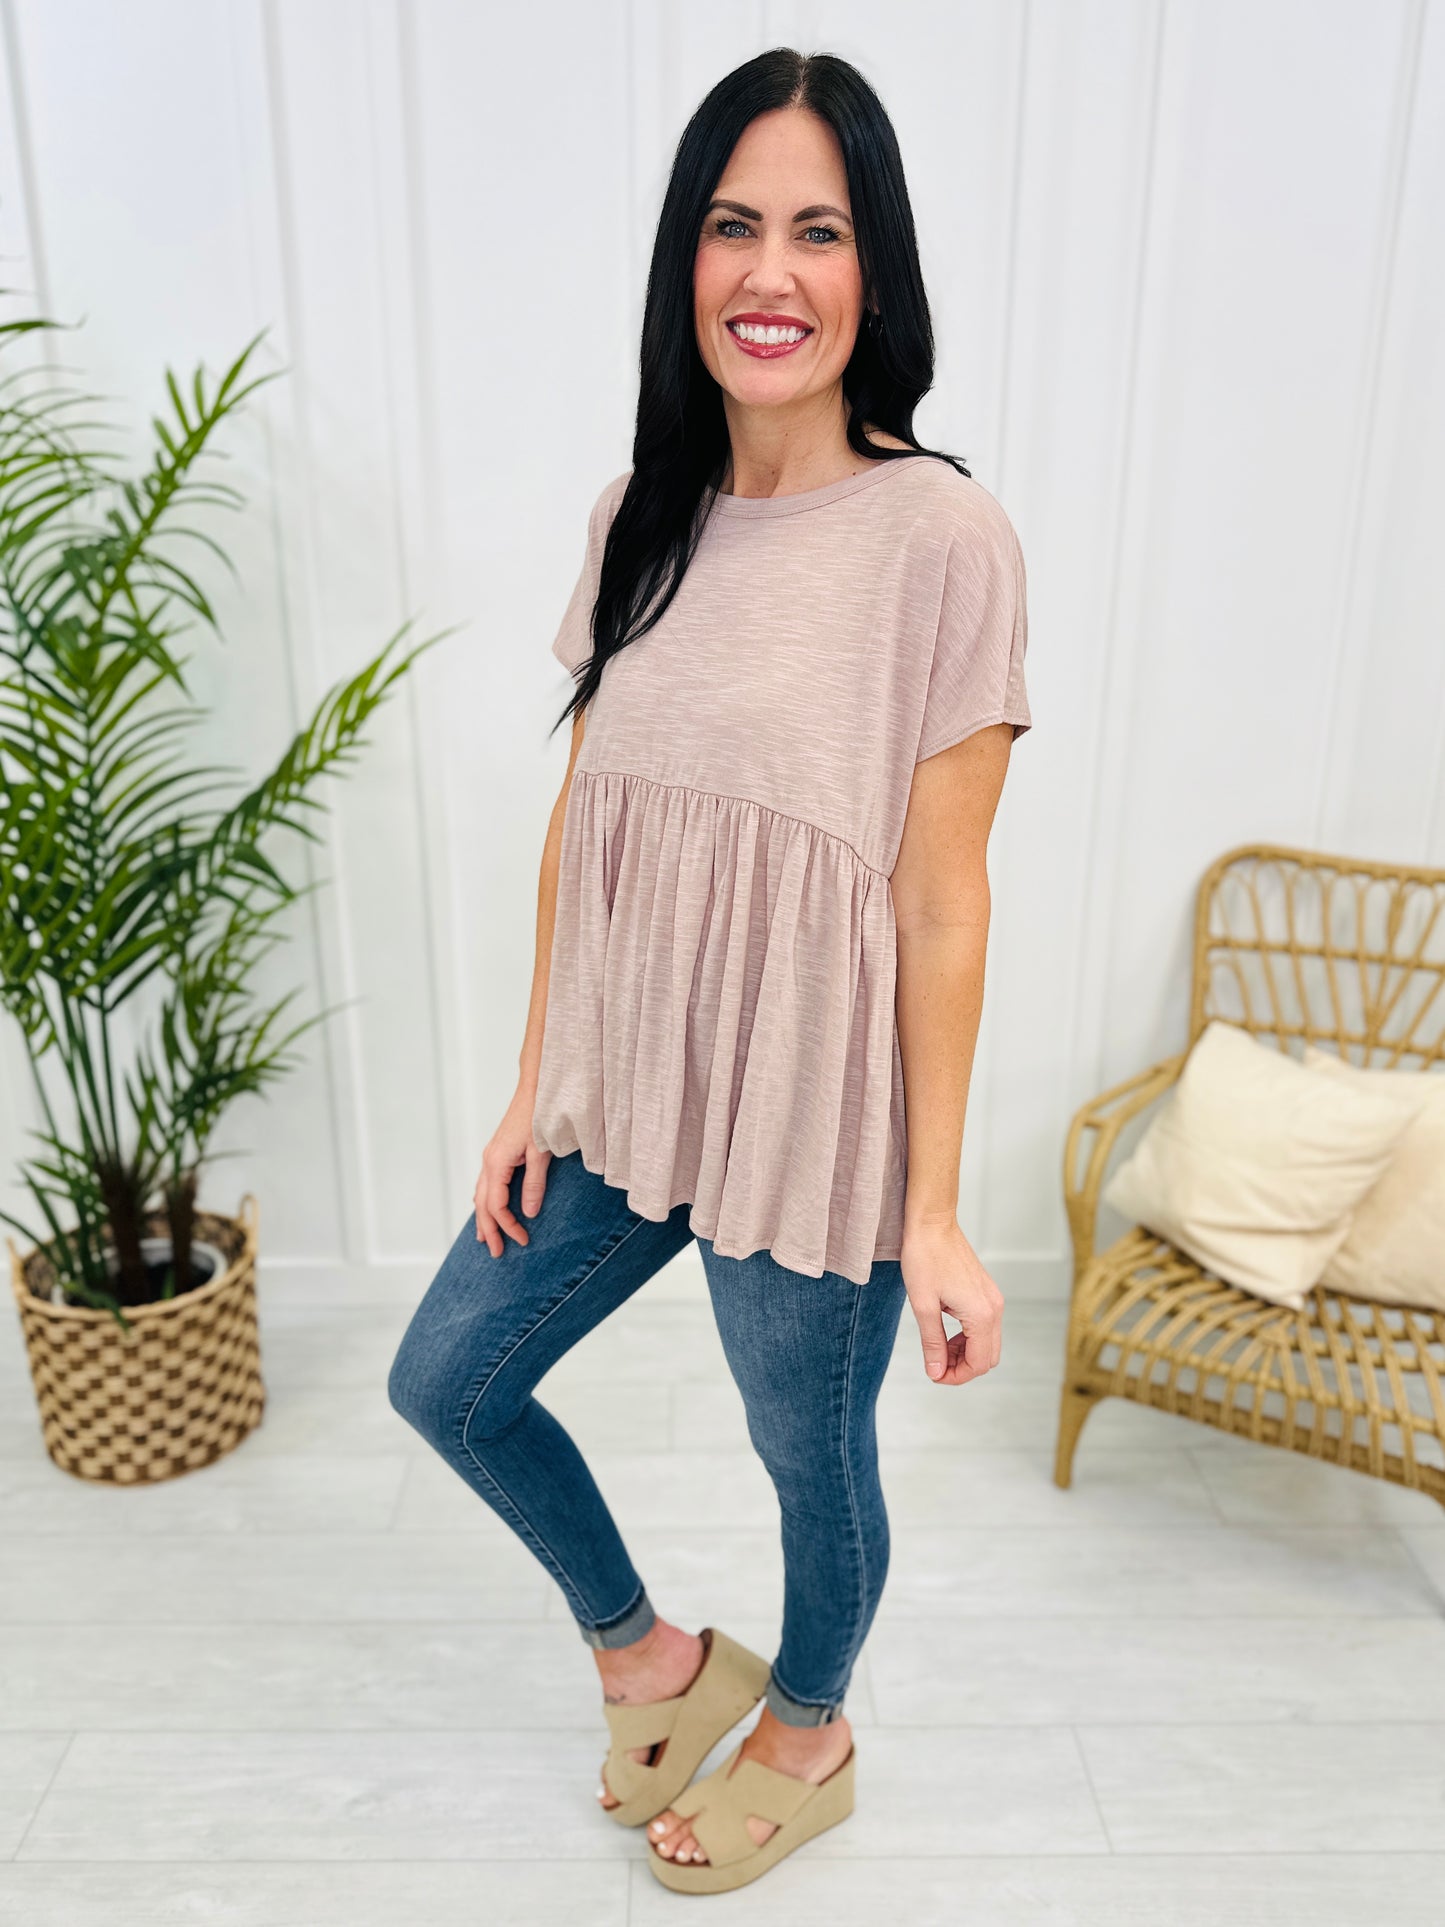 New Love Interest Top- Multiple Colors!